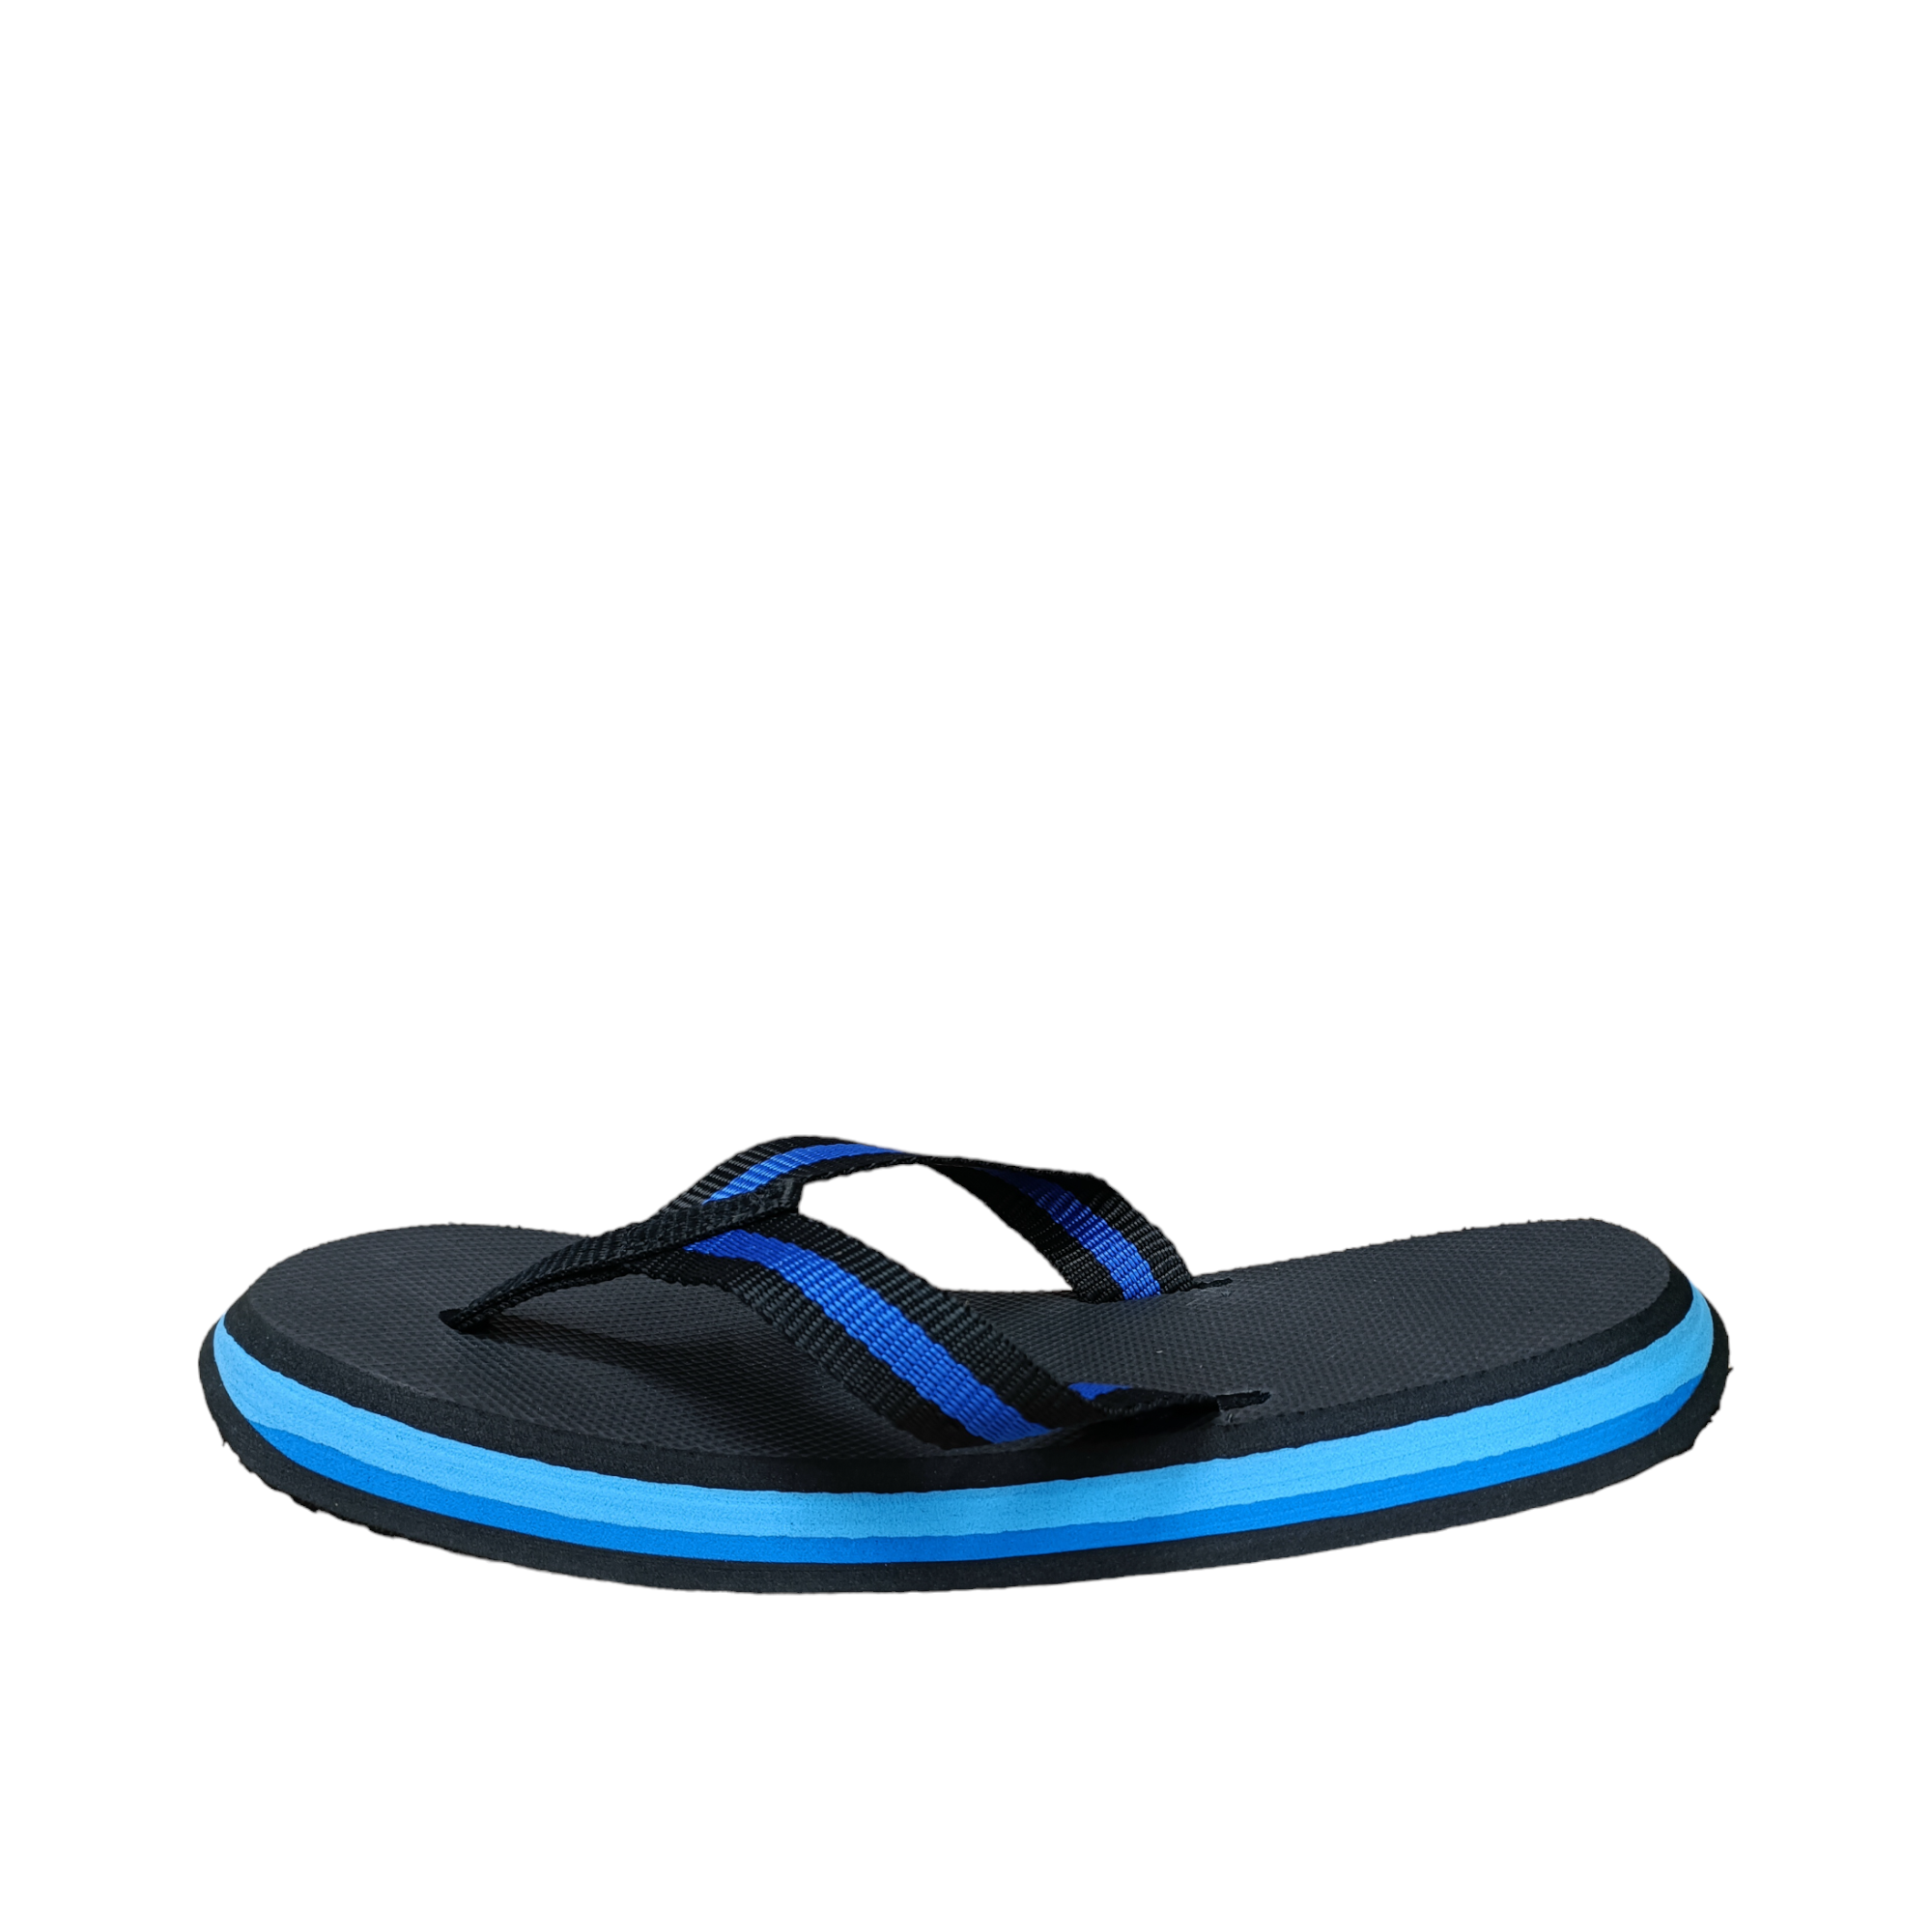 Stompers - shoe&amp;me - Stompers - Jandal - Jandals, Mens, Summer, Unisex, Womens